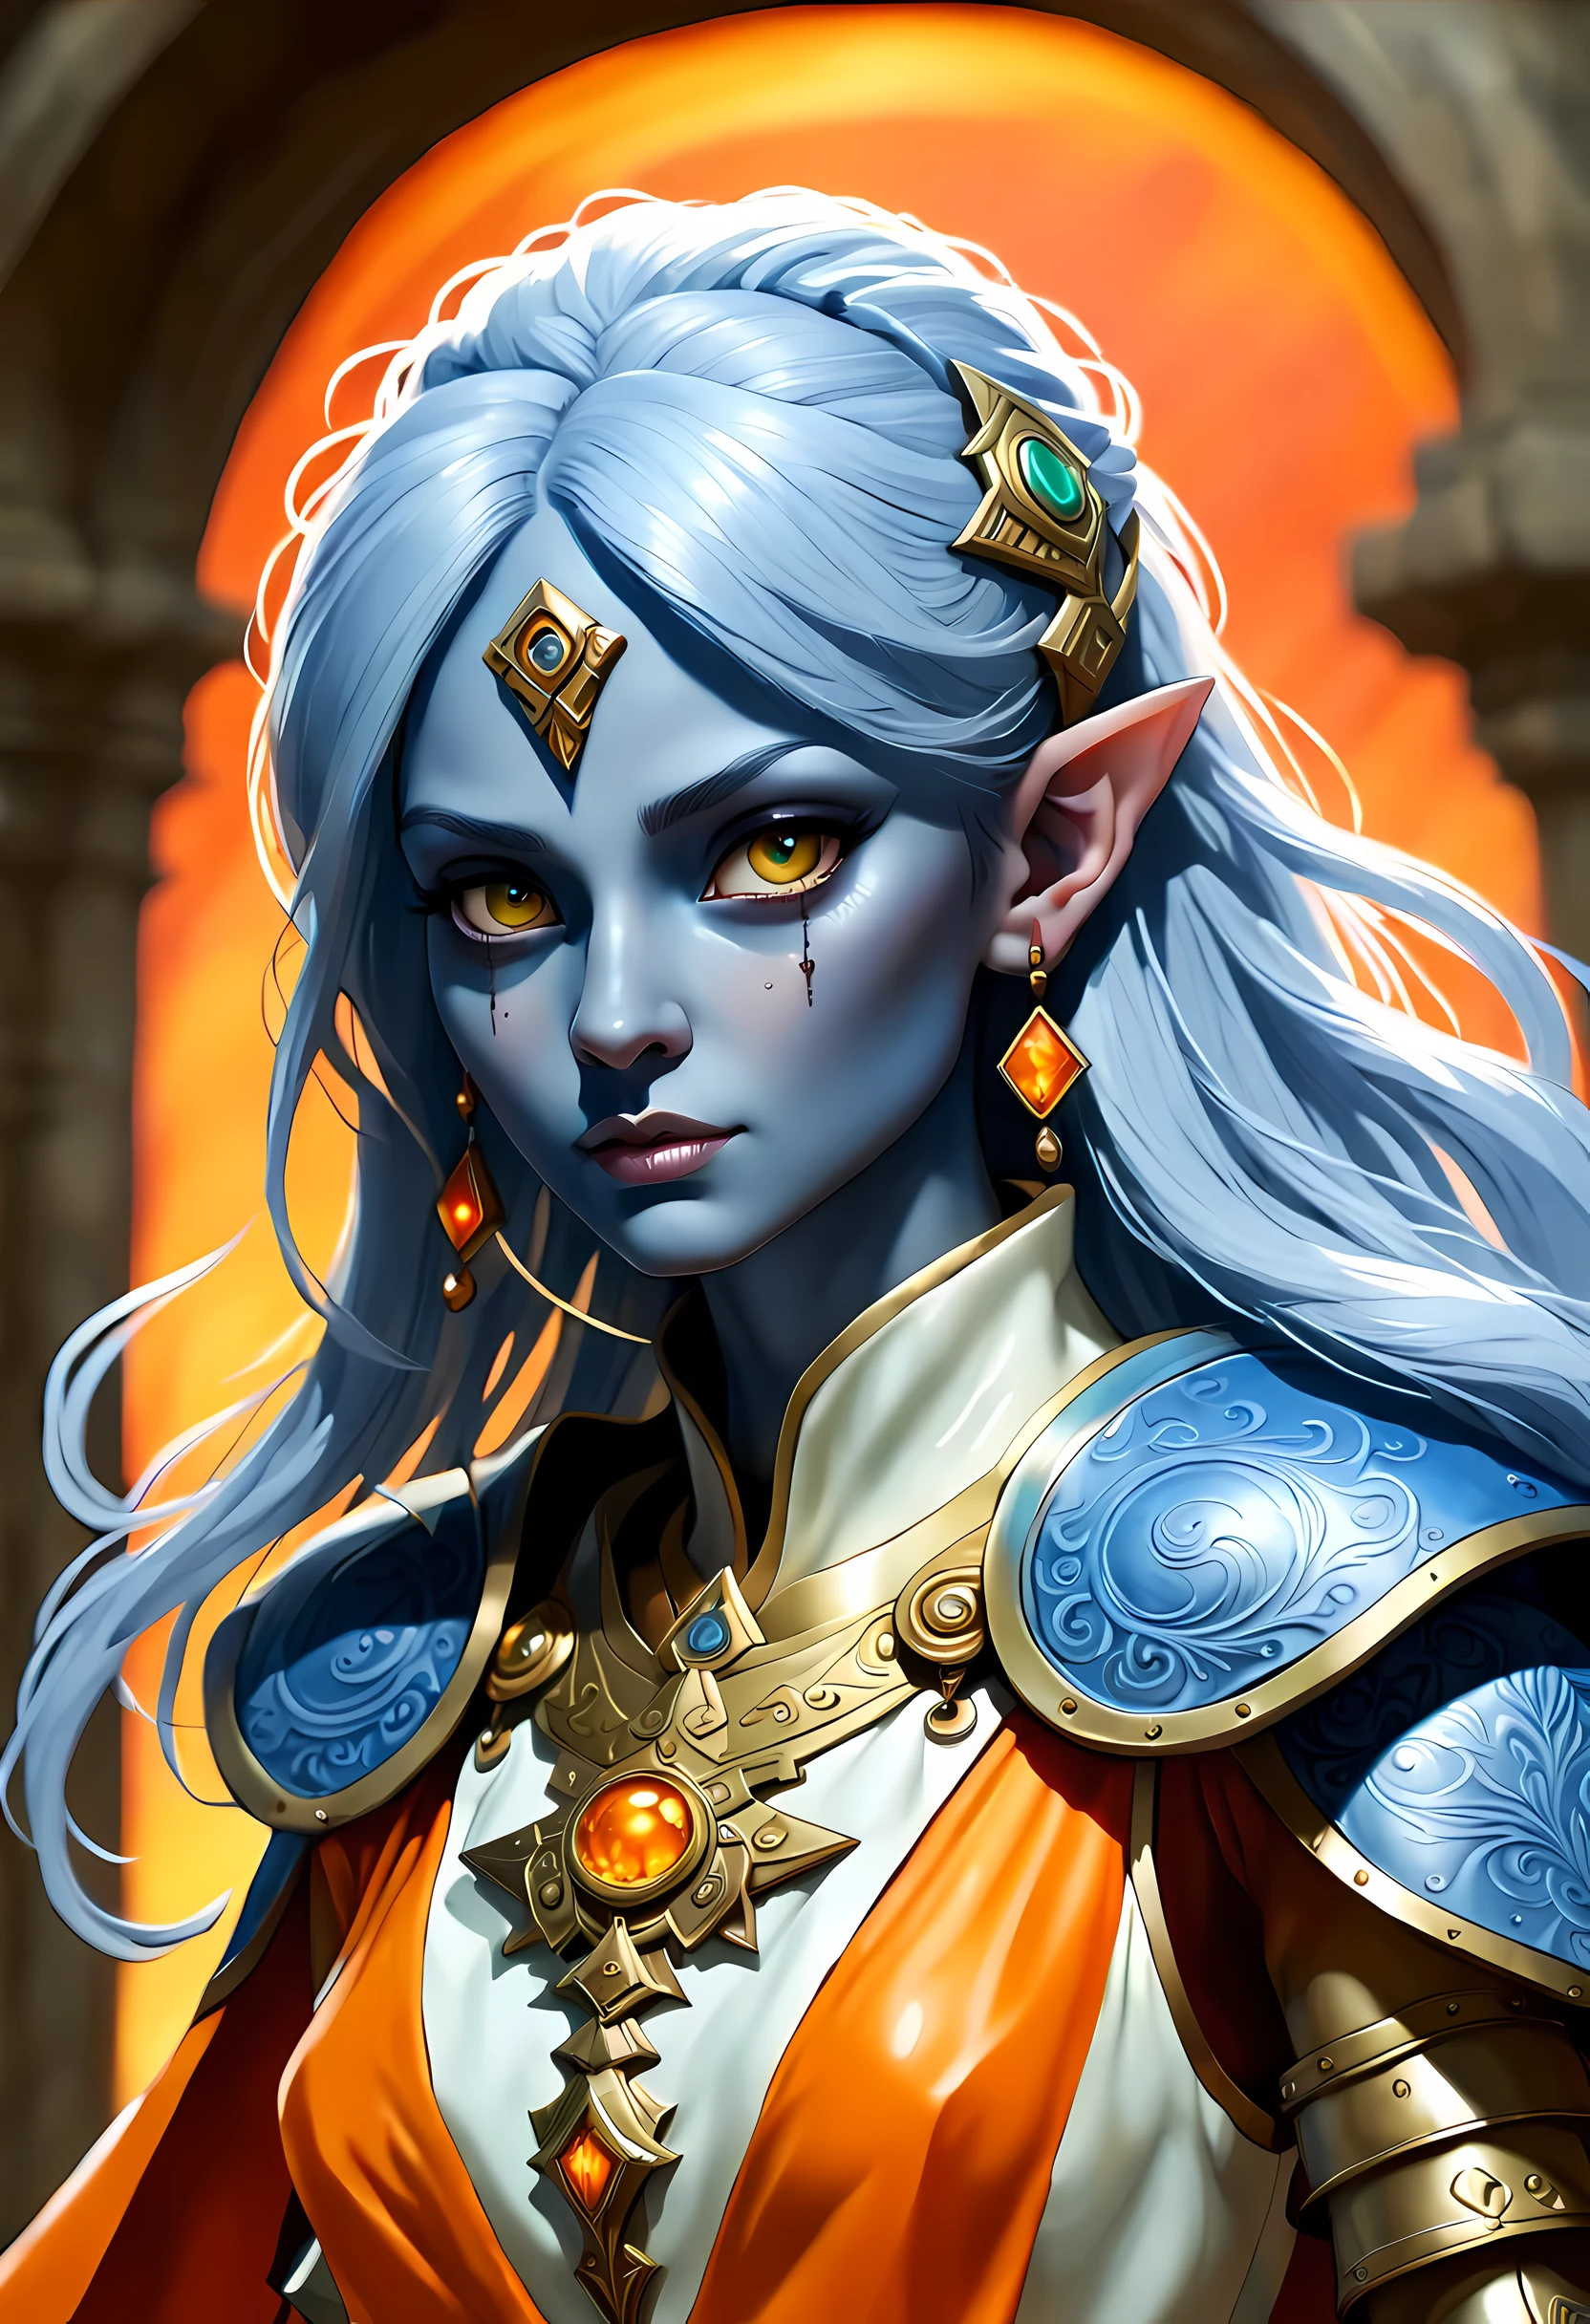 fAntAsy Art, dnd Art, RPG Art, Weitwinkelaufnahme, (mAsterpiece: 1.4) A (portrAit: 1.3) intense detAils, highly detAiled, photoreAlistic, best quAlity, highres, portrAit A femAle (fAntAsy Art, MAsterpiece, best quAlity: 1.3) ((Blau skin: 1.5)), intense detAils fAciAl detAils, exquisite beAuty, (fAntAsy Art, MAsterpiece, best quAlity) Kleriker, (Blau: 1.3) skinned femAle, Weiß hAir, long hAir, ((hAir hides eArs: 1.5)), (grüne Augen: 1.3) Armed A fiery sword red fire, weAring heAvy (Weiß: 1.3) hAlf plAte mAil Armor, weAring high heeled lAced boots, weAring An(orAnge :1.3) cloAk, weAring glowing holy symbol GlowingRunes_Gelb, within fAntAsy temple bAckground, Reflexionslicht, high detAils, best quAlity, 16k, [ultrA detAiled], mAsterpiece, best quAlity, (extremely detAiled), Nahaufnahme, ultrA Weitwinkelaufnahme, photoreAlistic, Roh, fAntAsy Art, dnd Art, fAntAsy Art, reAlistic Art,((best quAlity)), ((mAsterpiece)), (detAiled), perfect fAce,